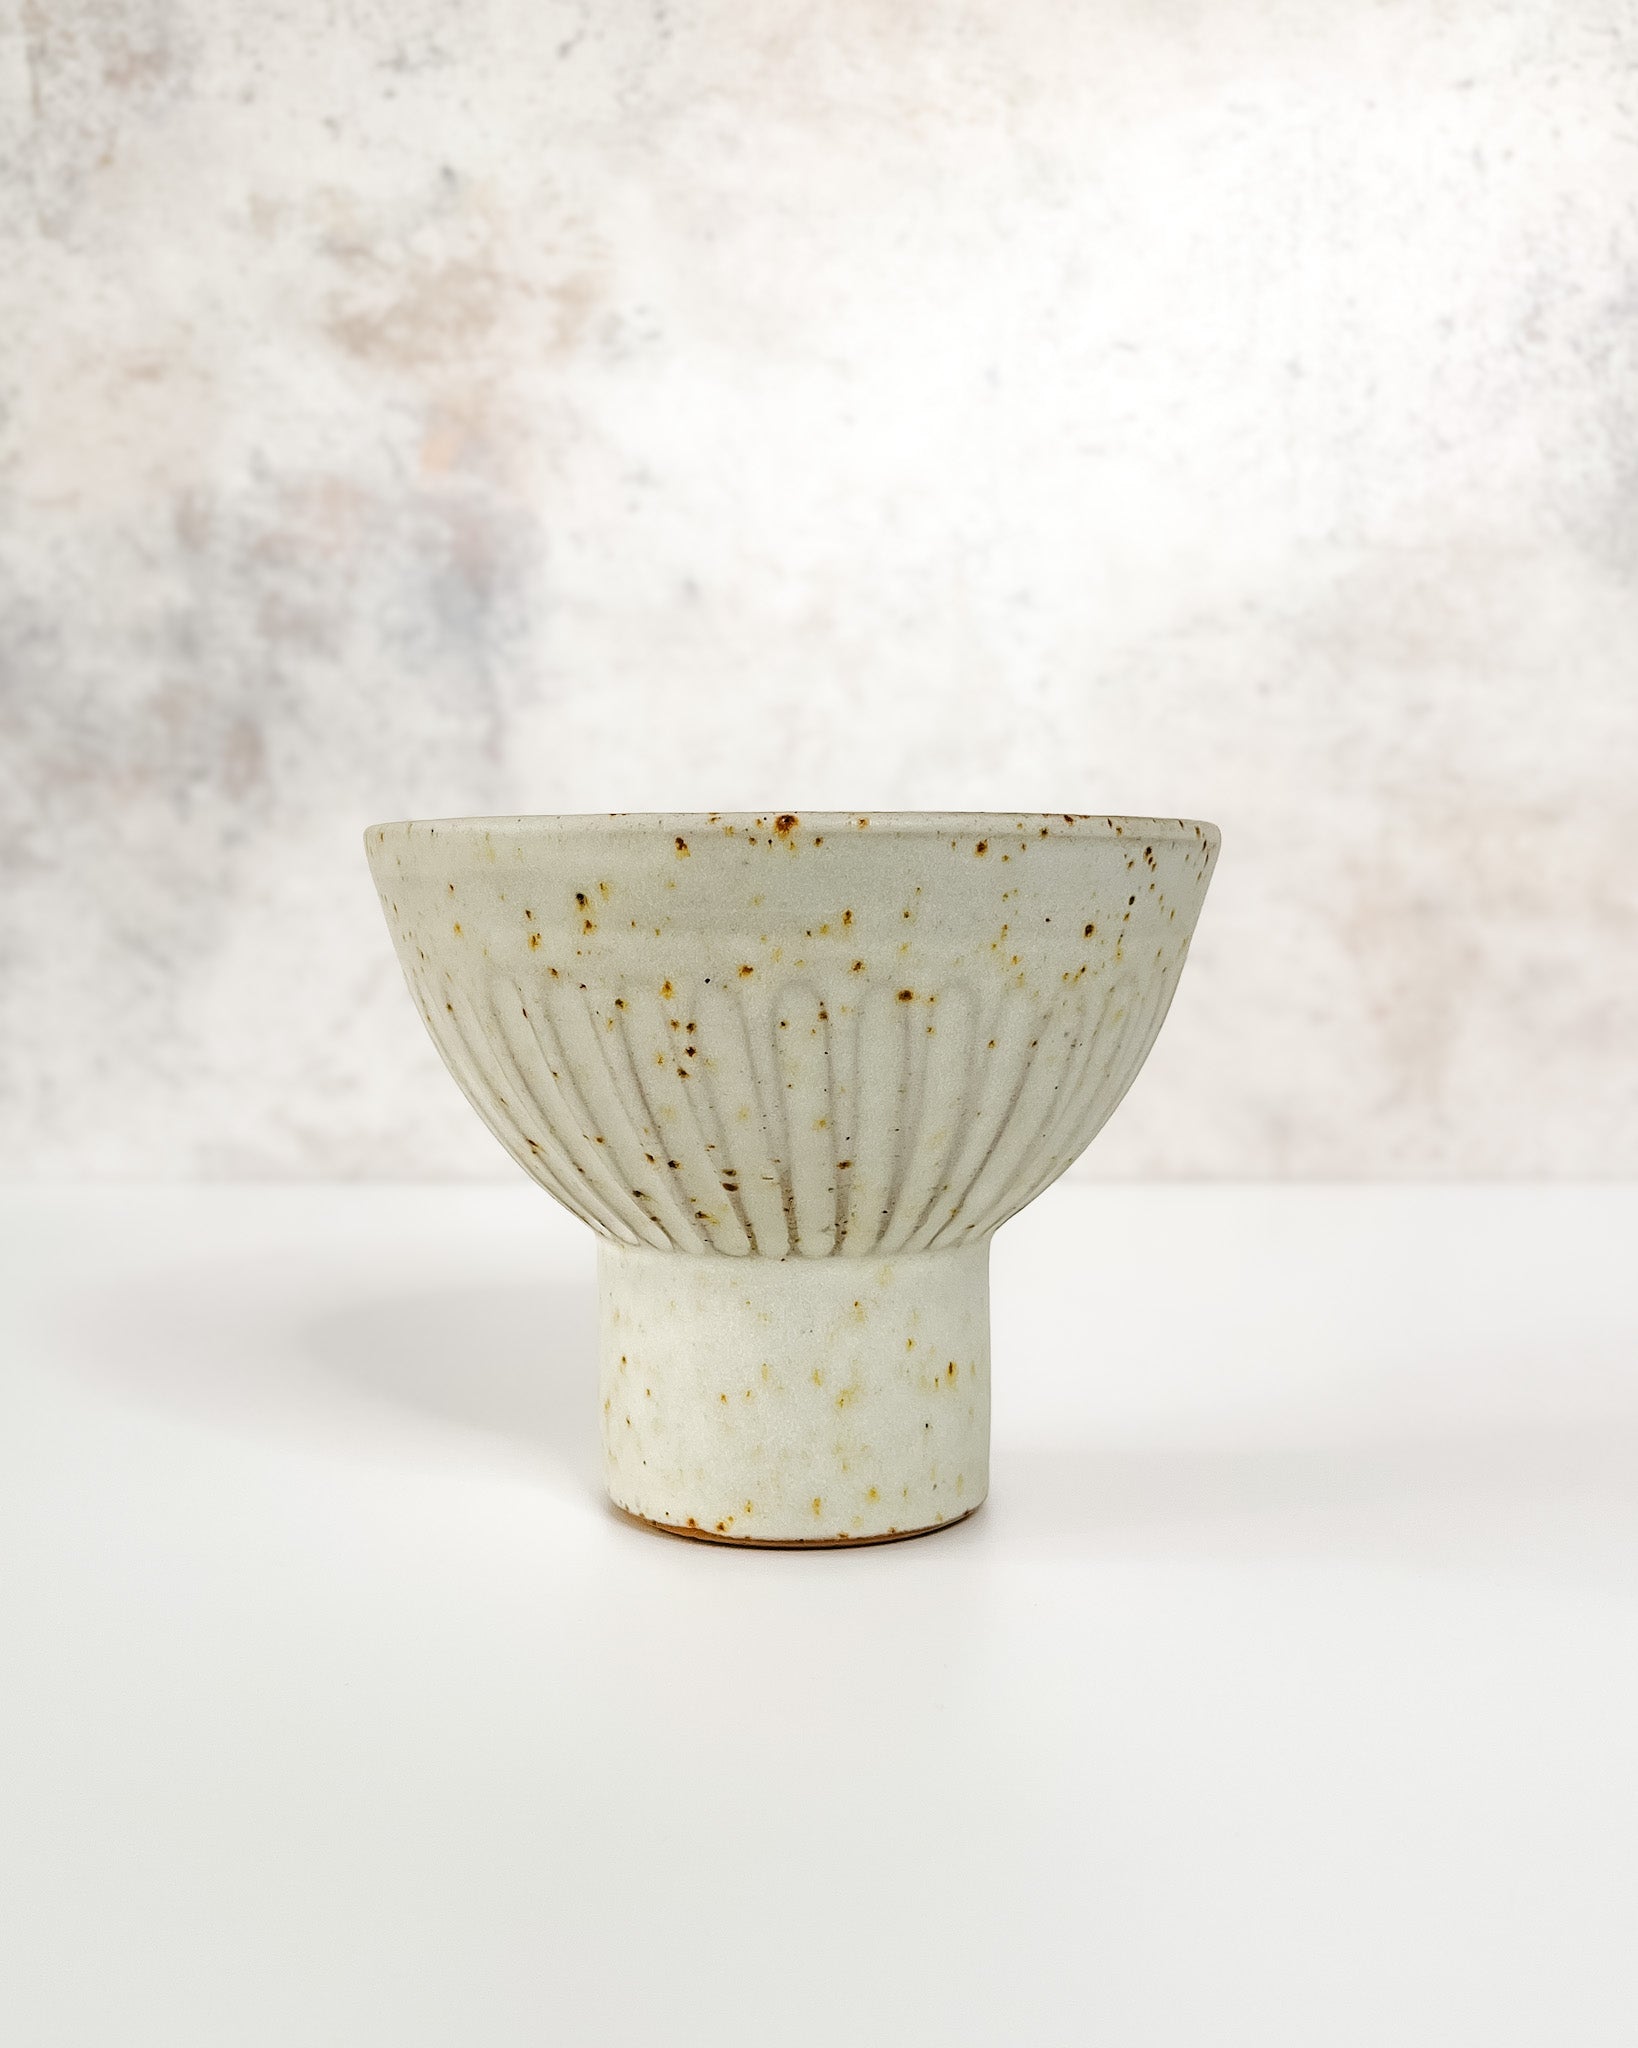 Hand-thrown ceramic Ikebana vase set with speckled clay, carved texture, and an elevated base, featuring a stem holder for floral displays.